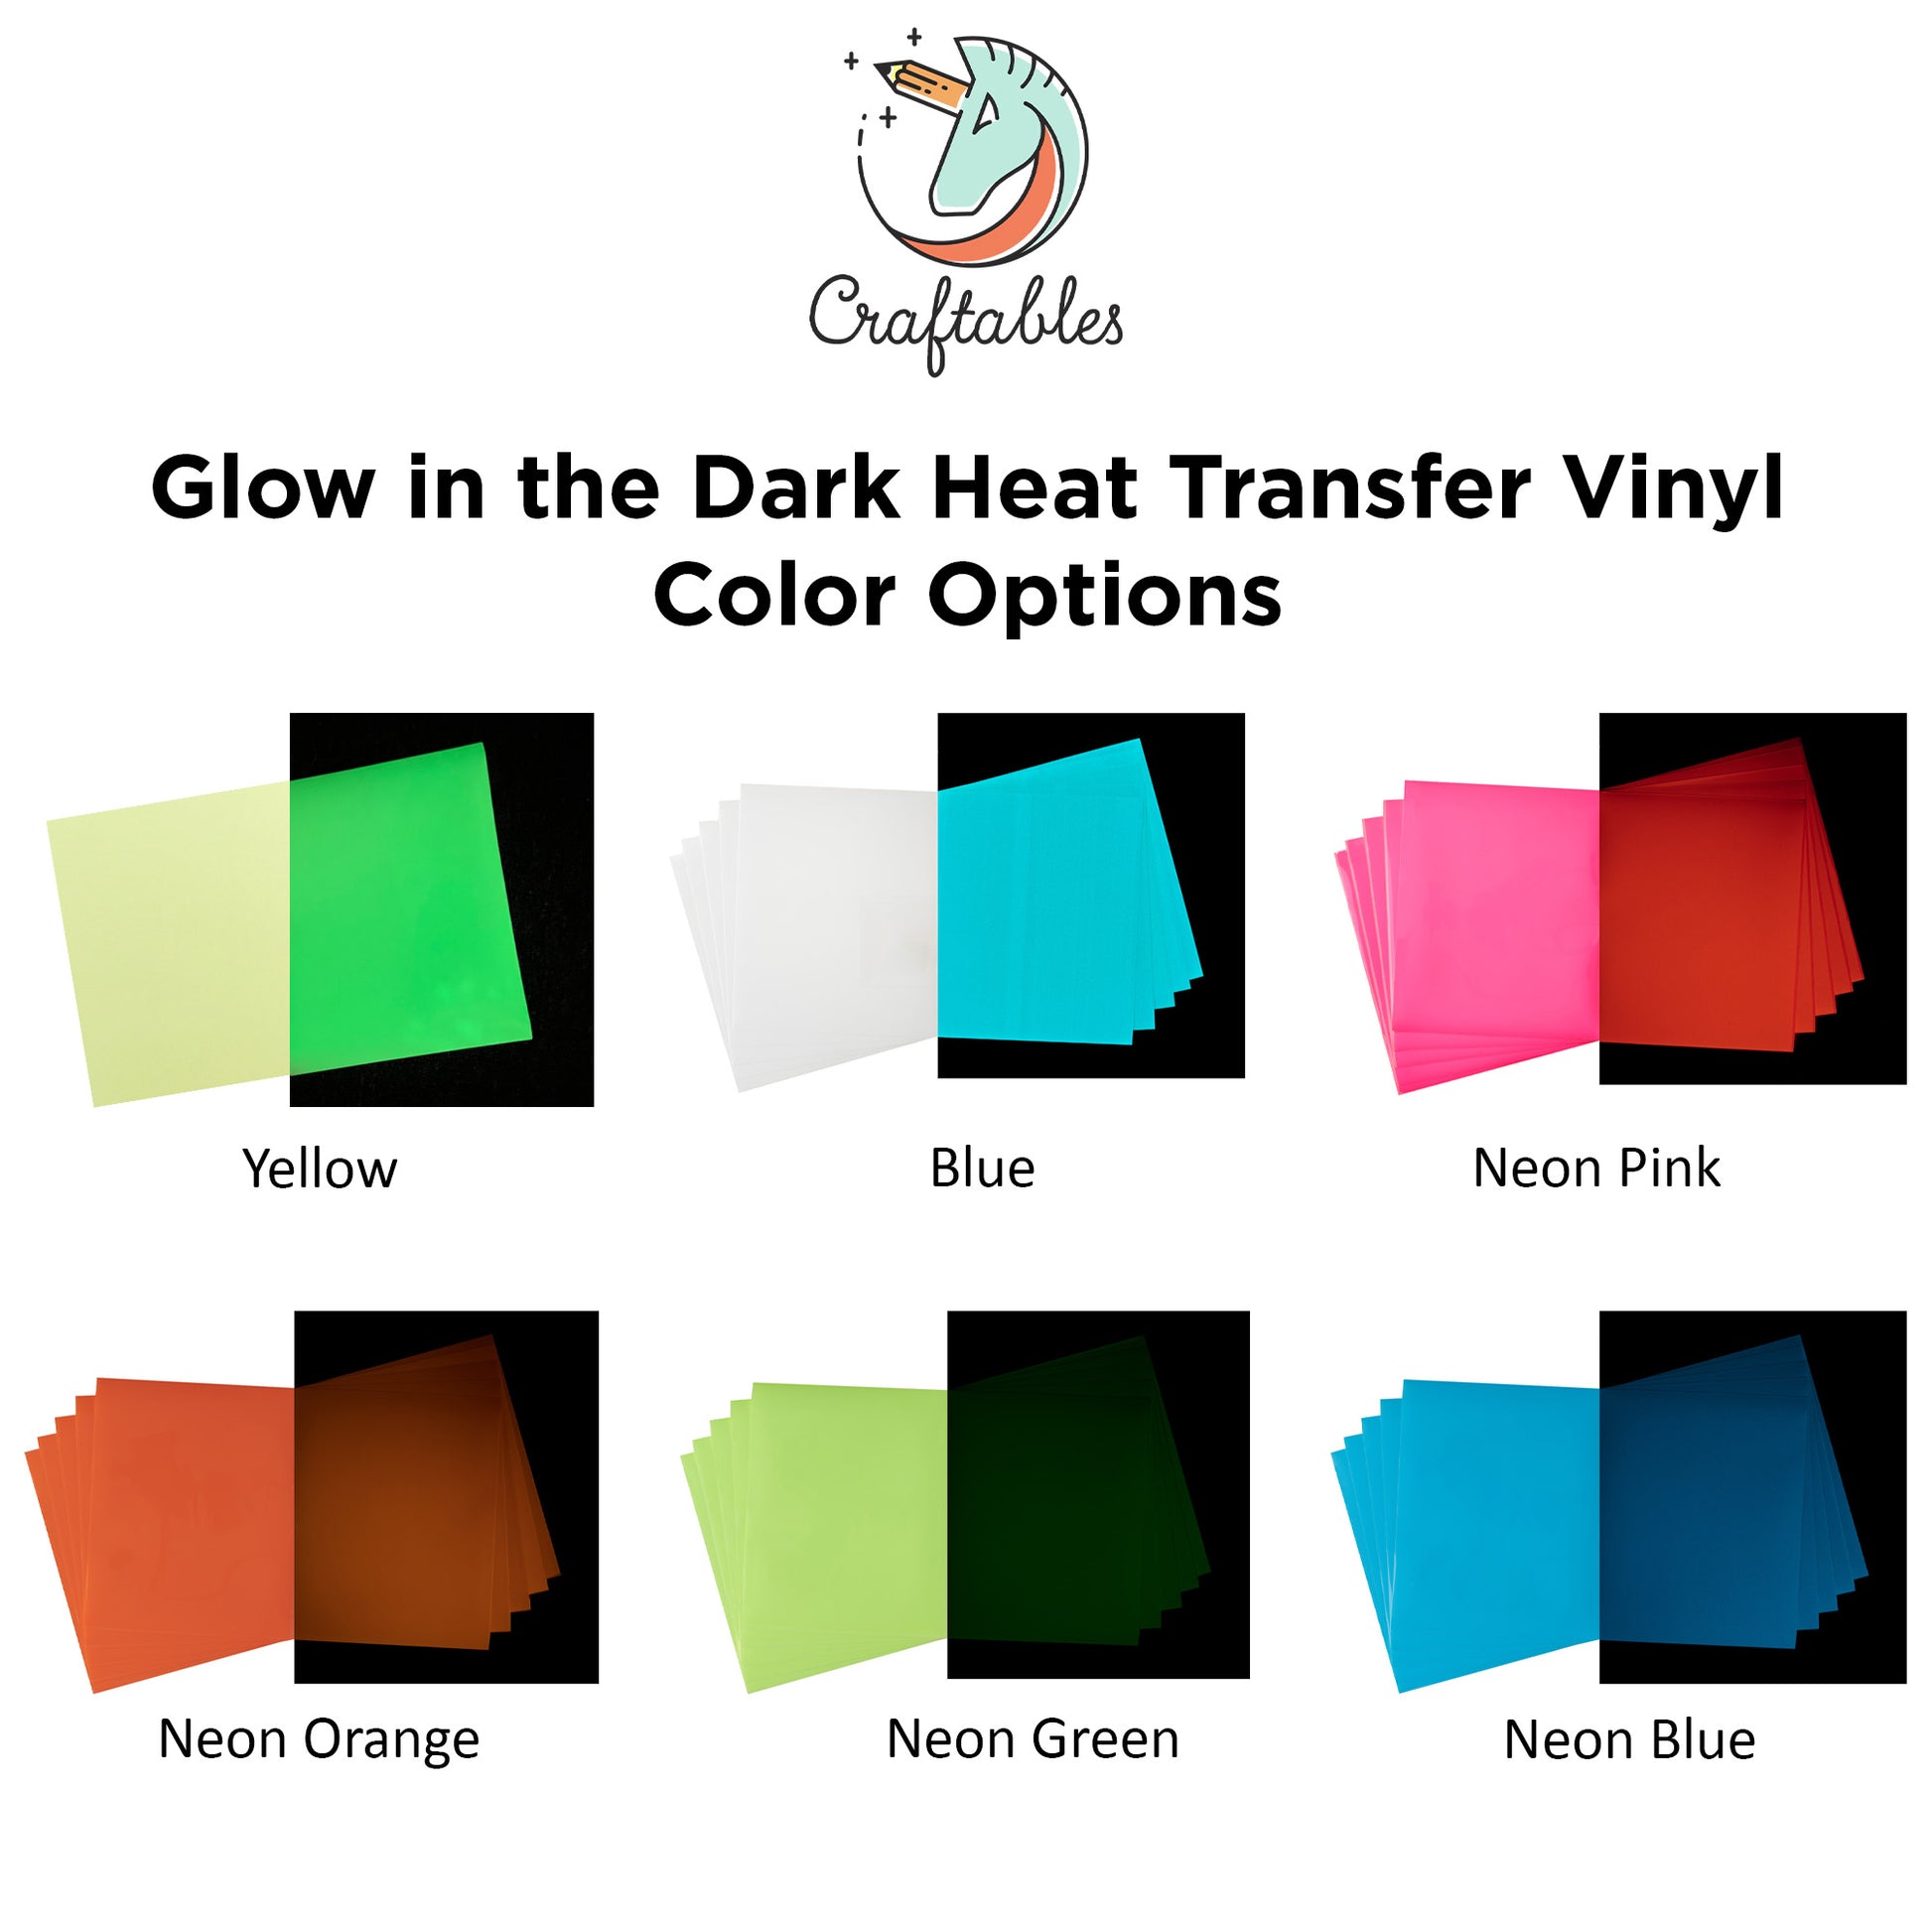 Neon Pink Glow in the Dark Heat Transfer Vinyl Sheets By Craftables –  shopcraftables